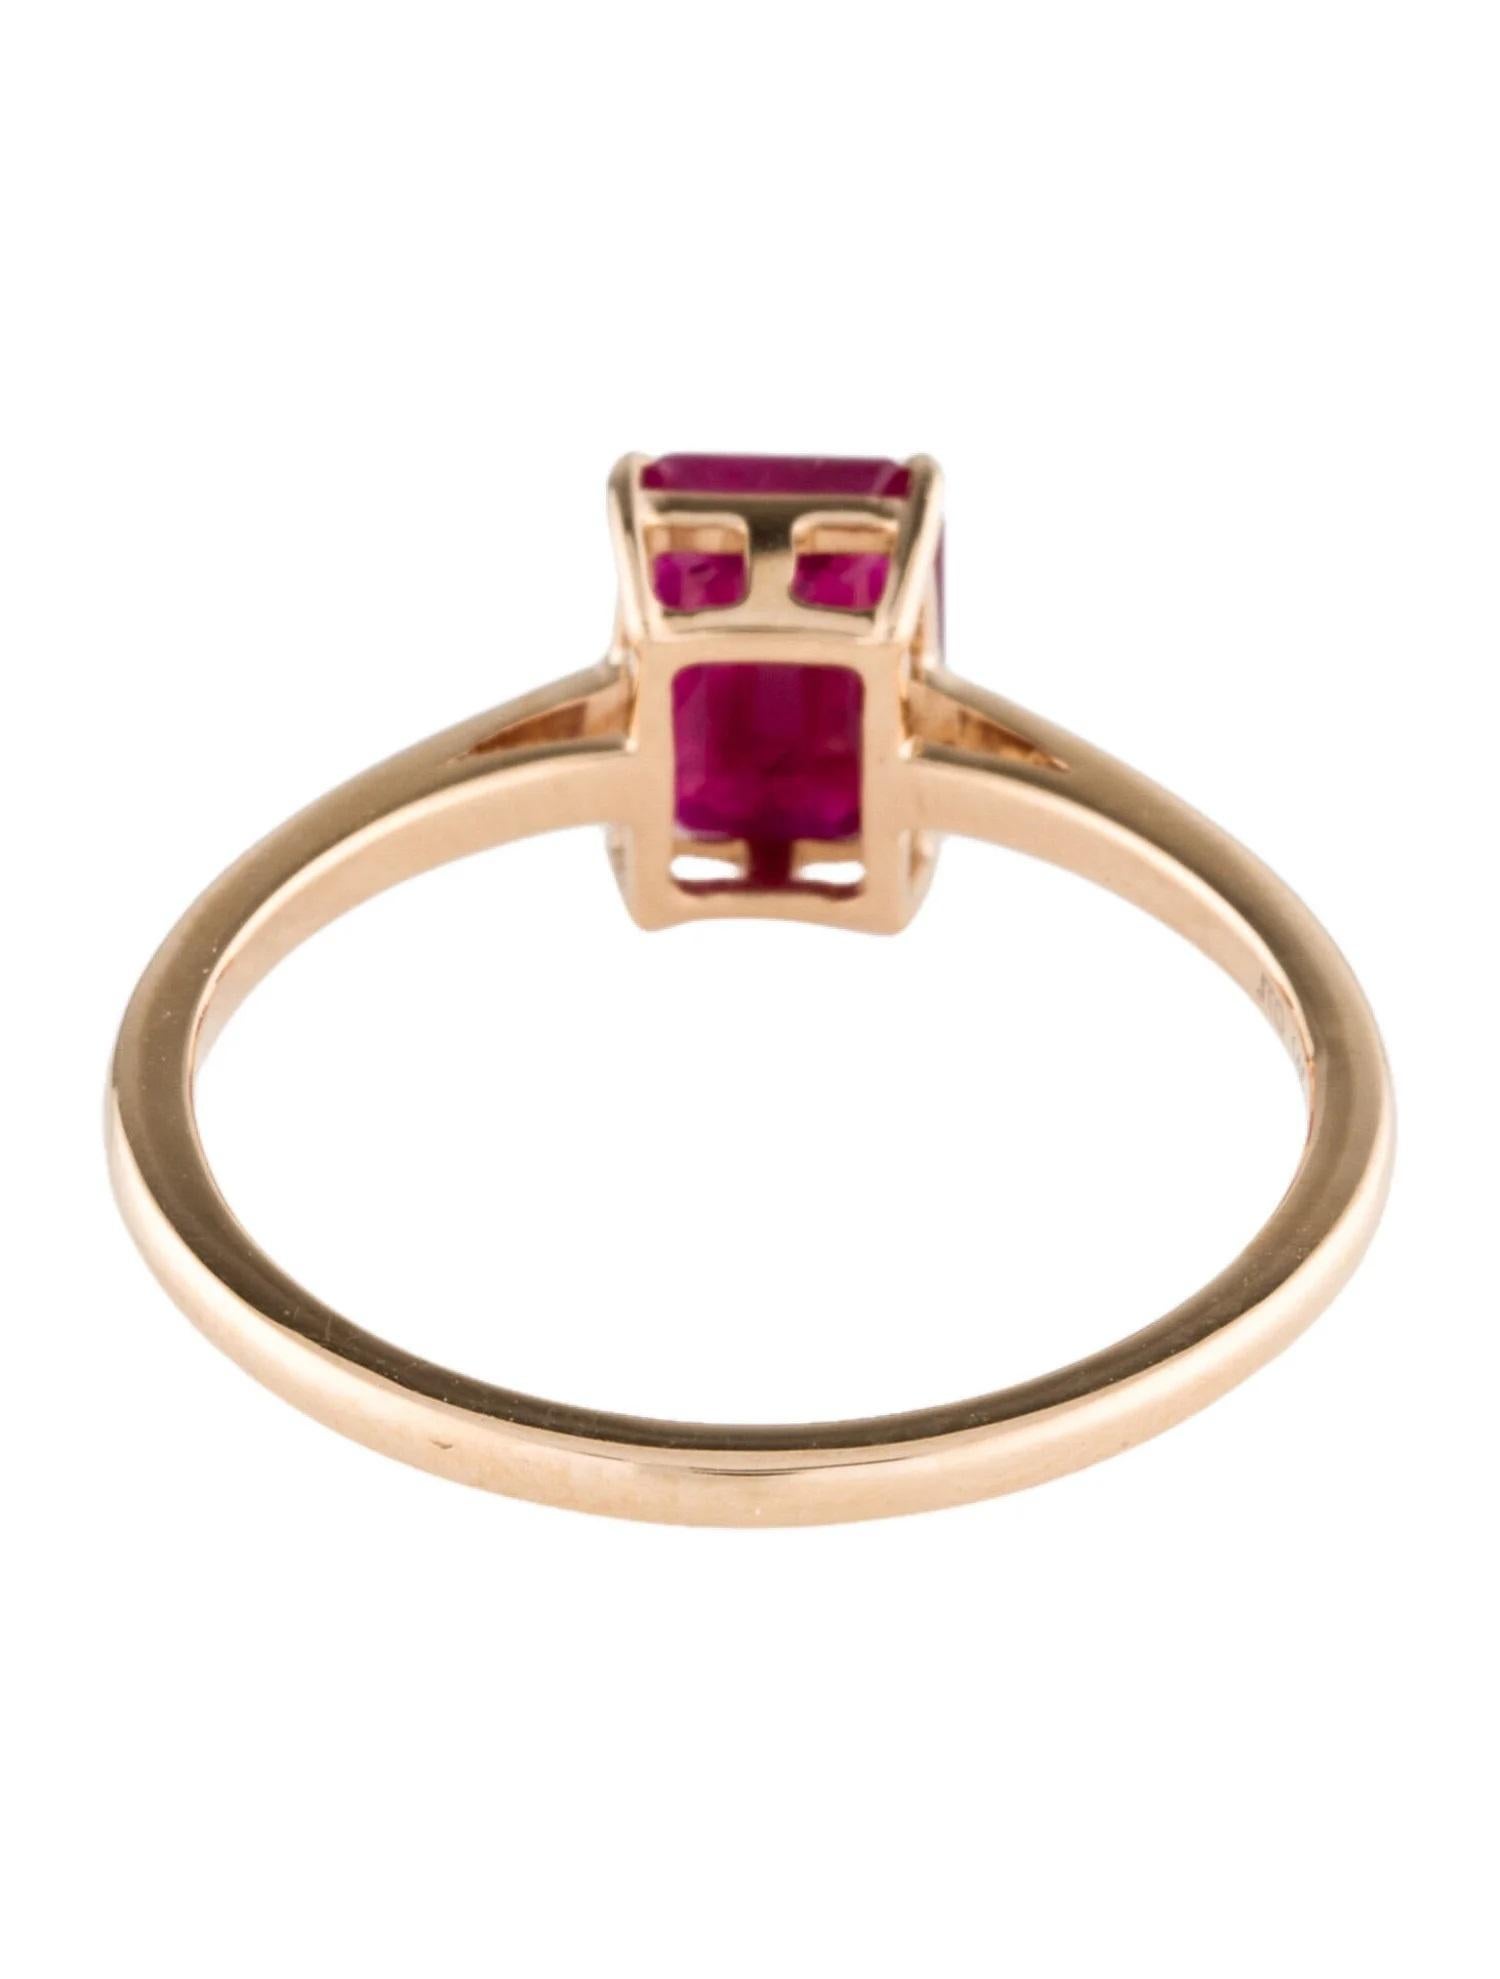 Emerald Cut 14K Yellow Gold Ruby Cocktail Ring: Timeless Elegance & Brilliance For Sale